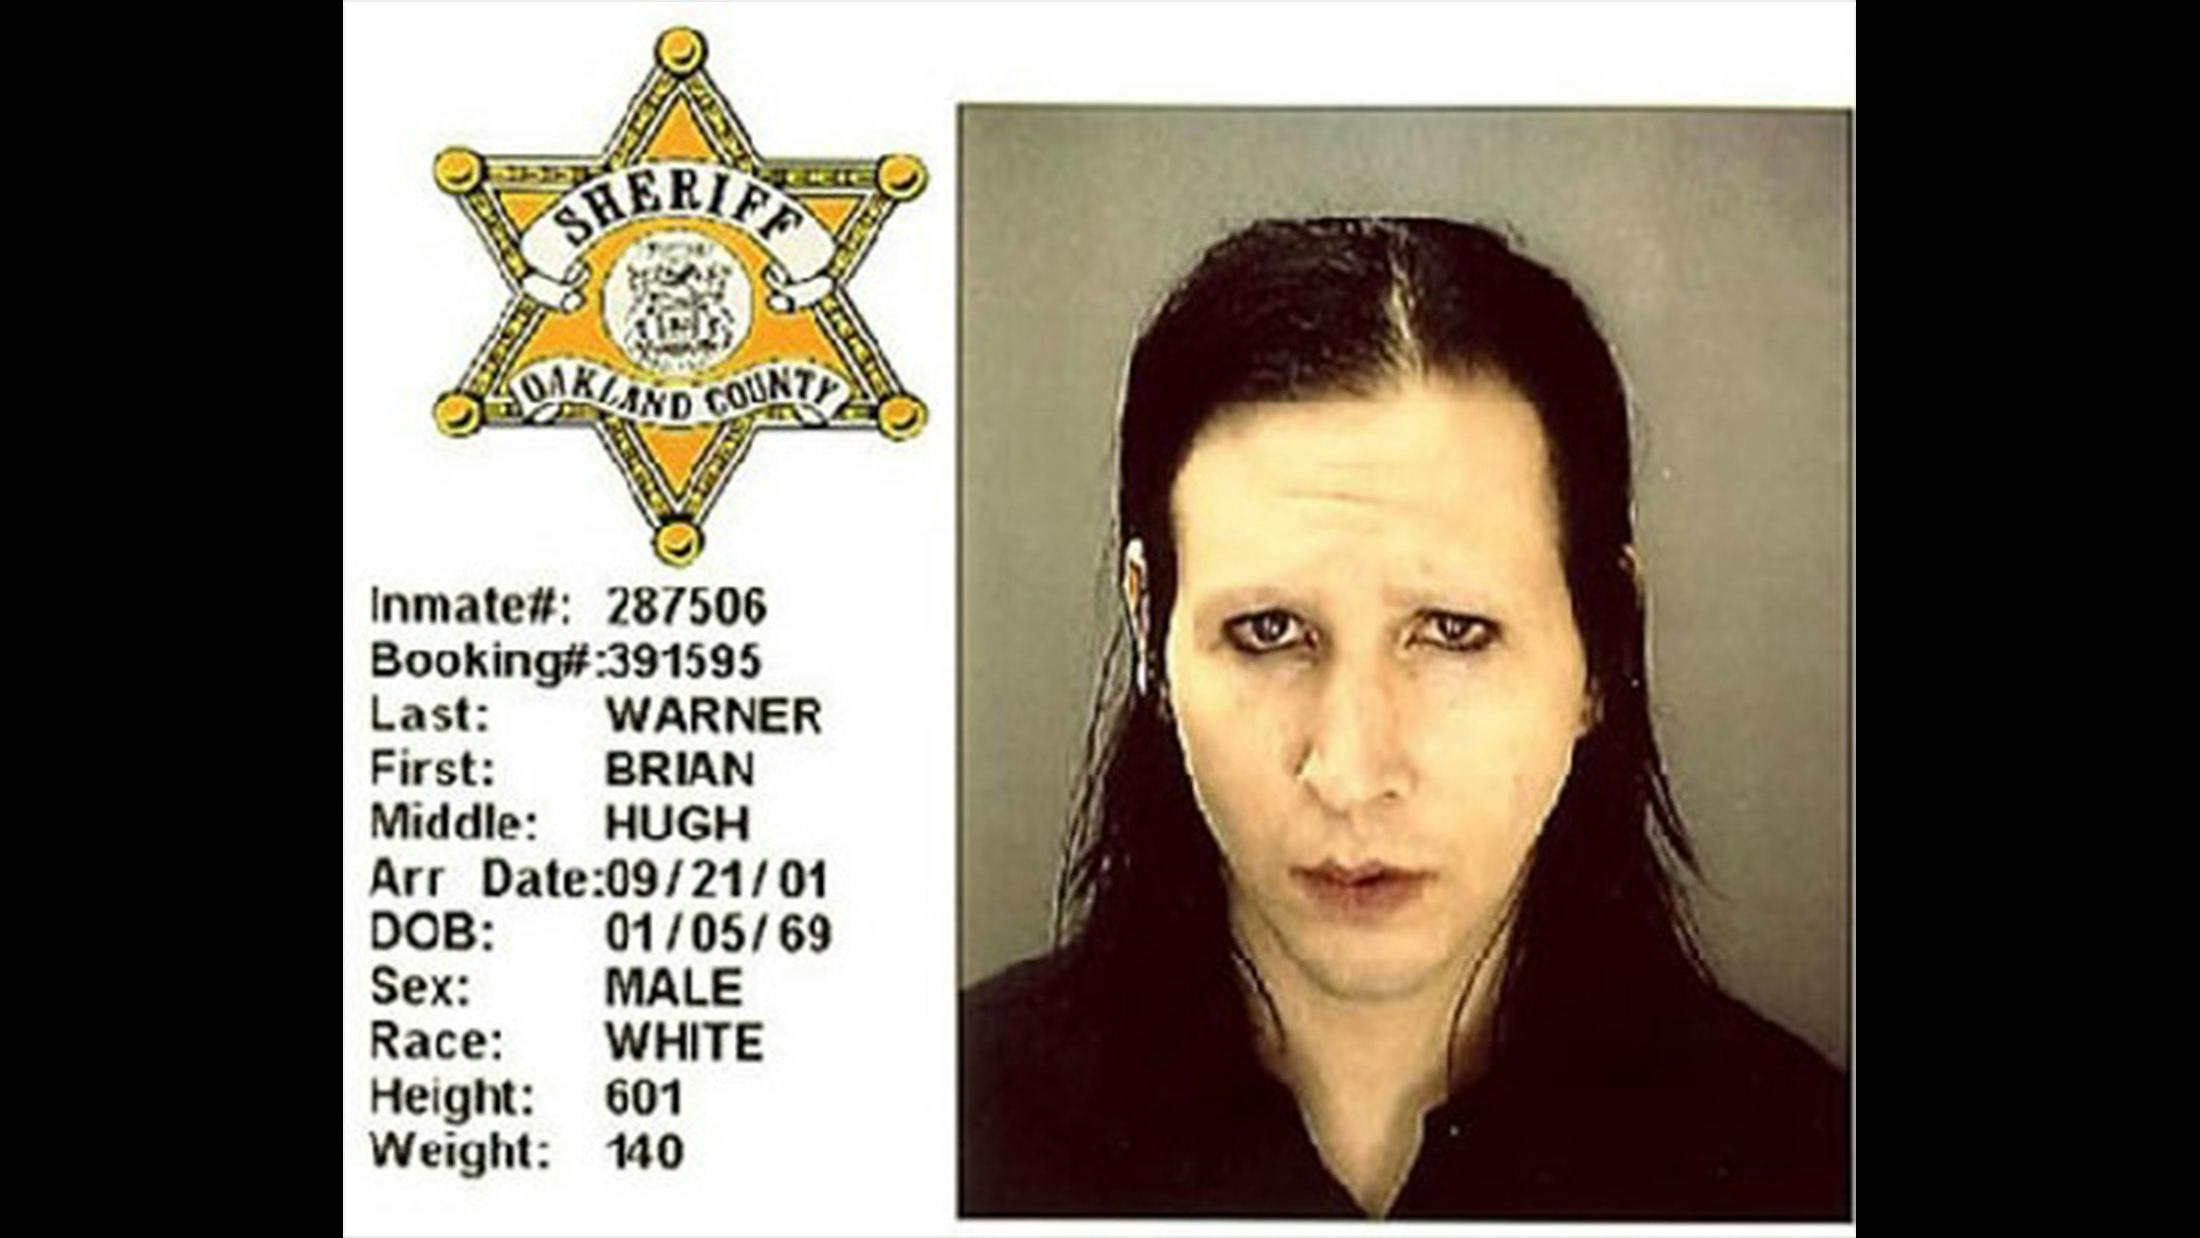 During Ozzfest 2001, Manson – performing in a leather thong and pantyhose – wrapped his legs around a member of the security team's head and put his balls where they shouldn't have been.

Manson was held on charges of battery and sexual assault against the guard, with the latter being dropped by the judge. He was forced to pay $4,000 in fines.